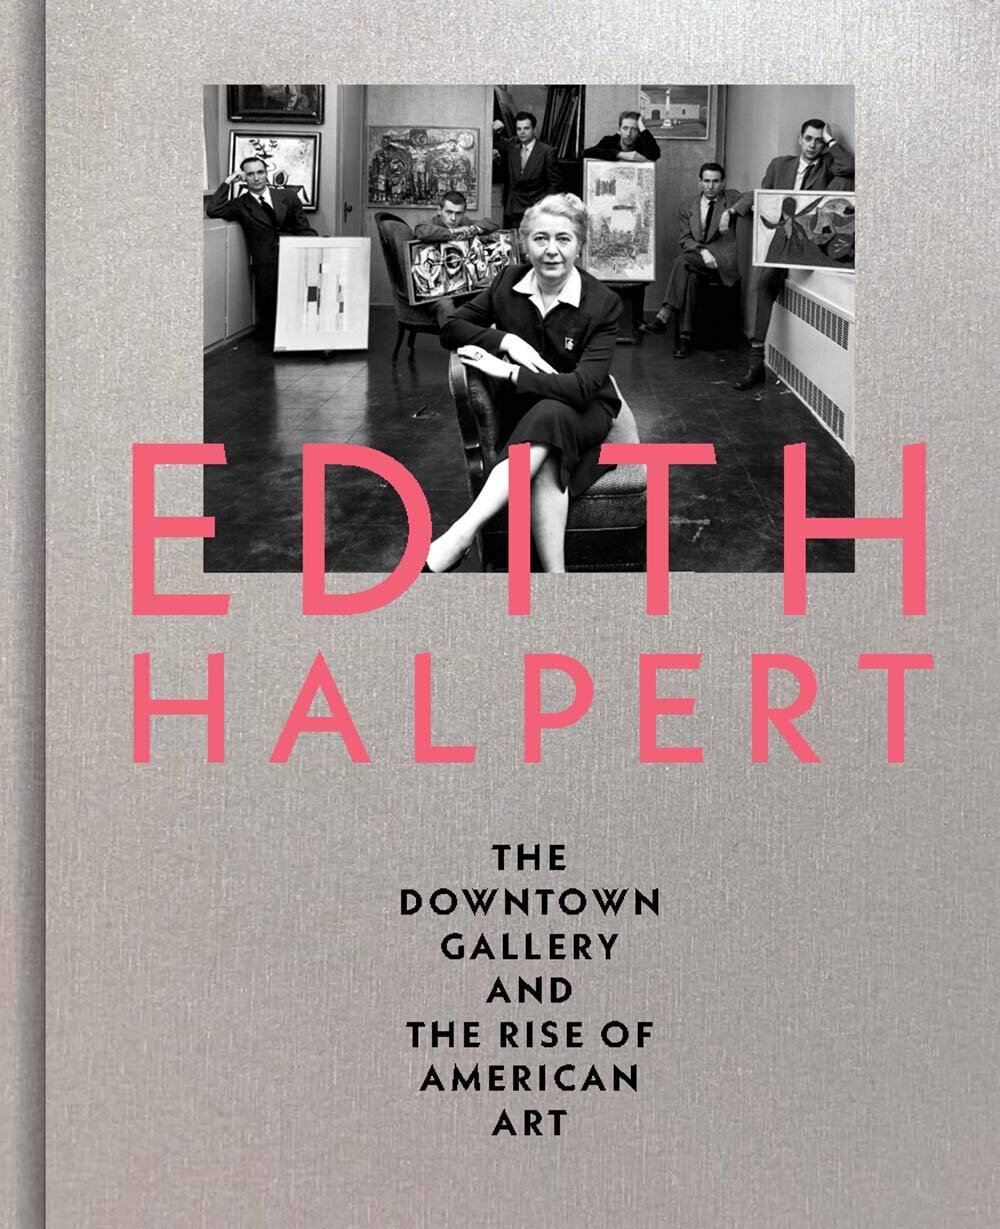   Edith Halpert, the Downtown Gallery, and the Rise of American Art.  